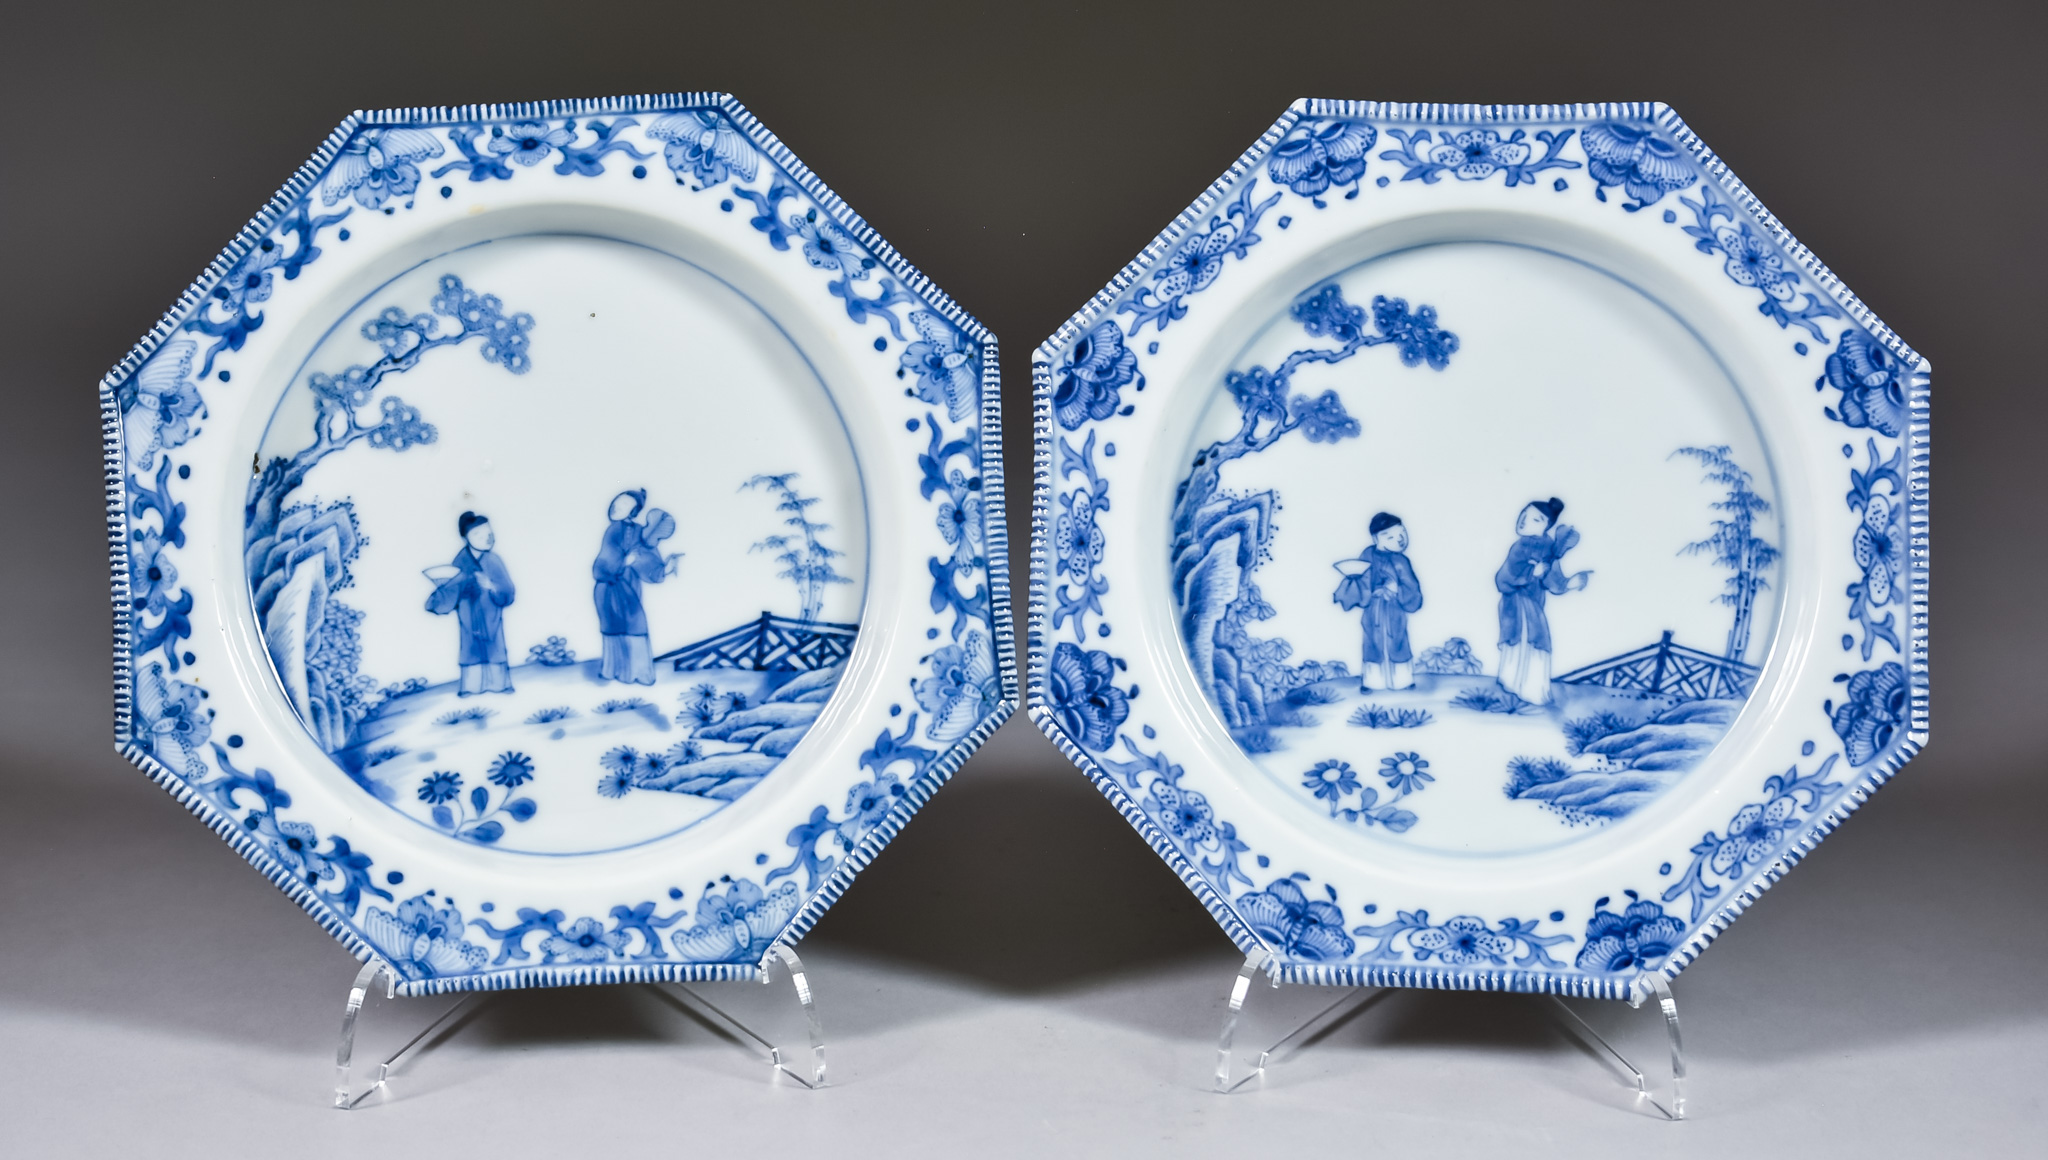 Two Chinese Blue and White Porcelain Octagonal Plates, Mid 18th Century, each painted with two